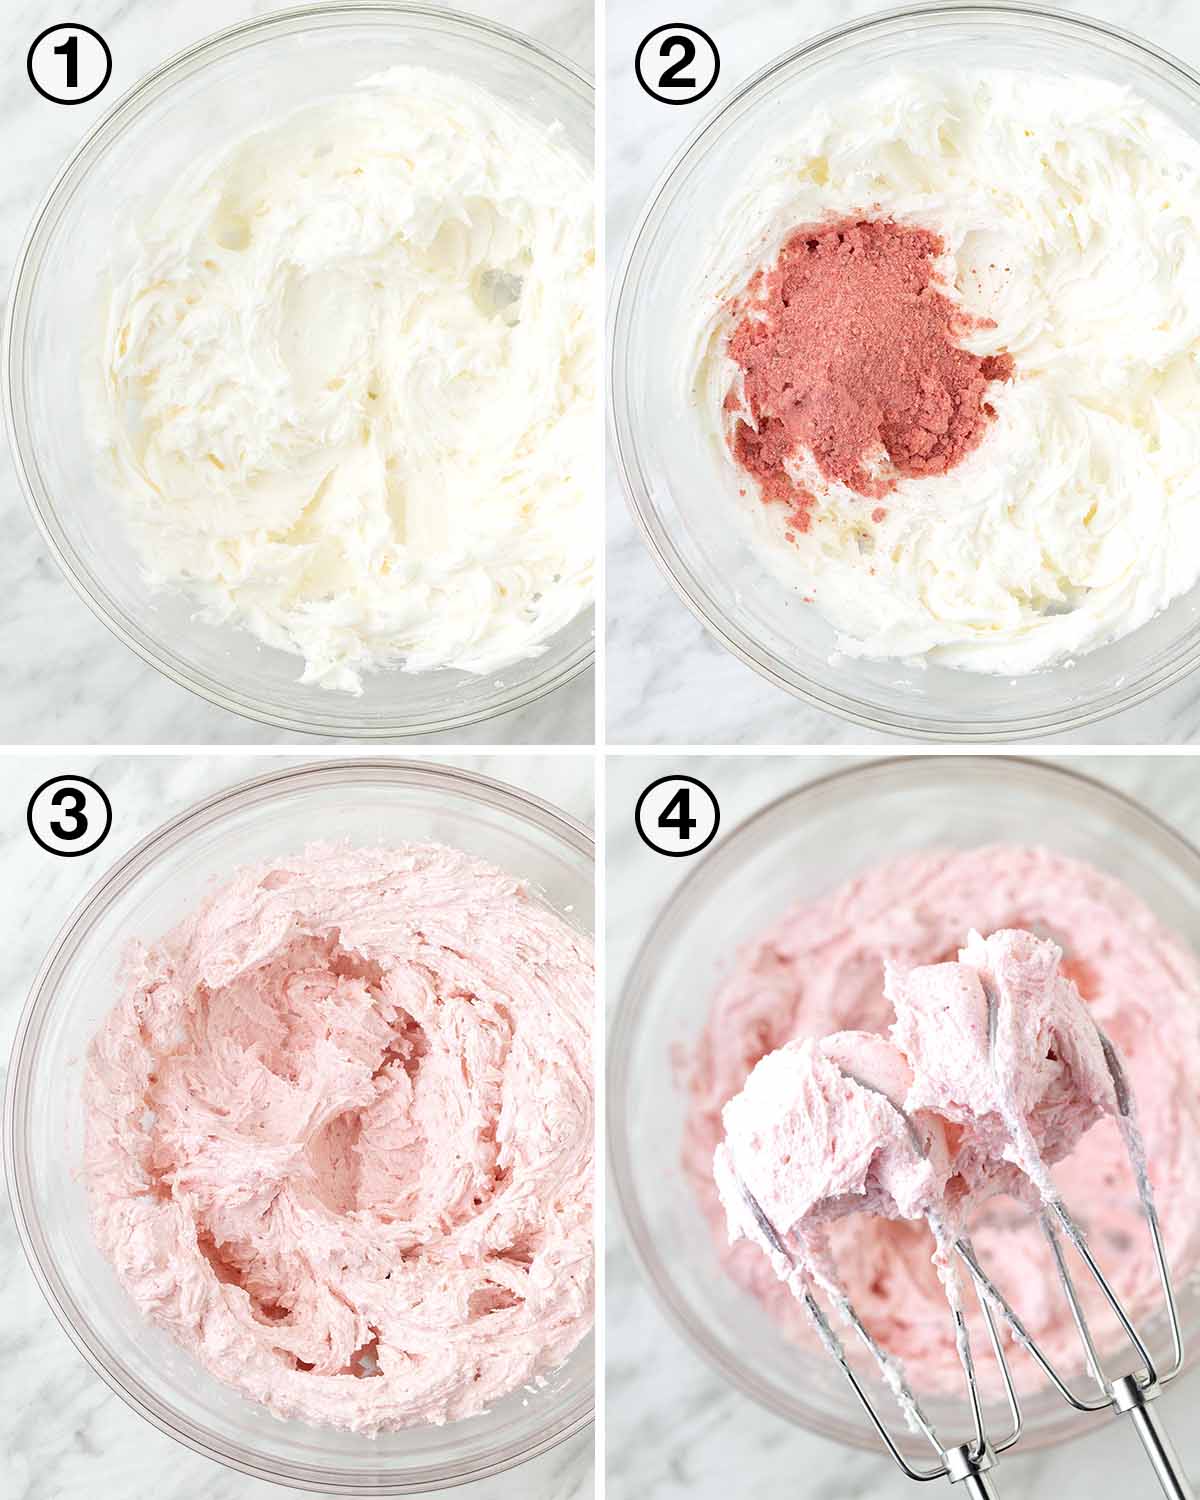 A collage of four images showing the sequence of steps needed to make vegan strawberry frosting with freeze-dried berries.